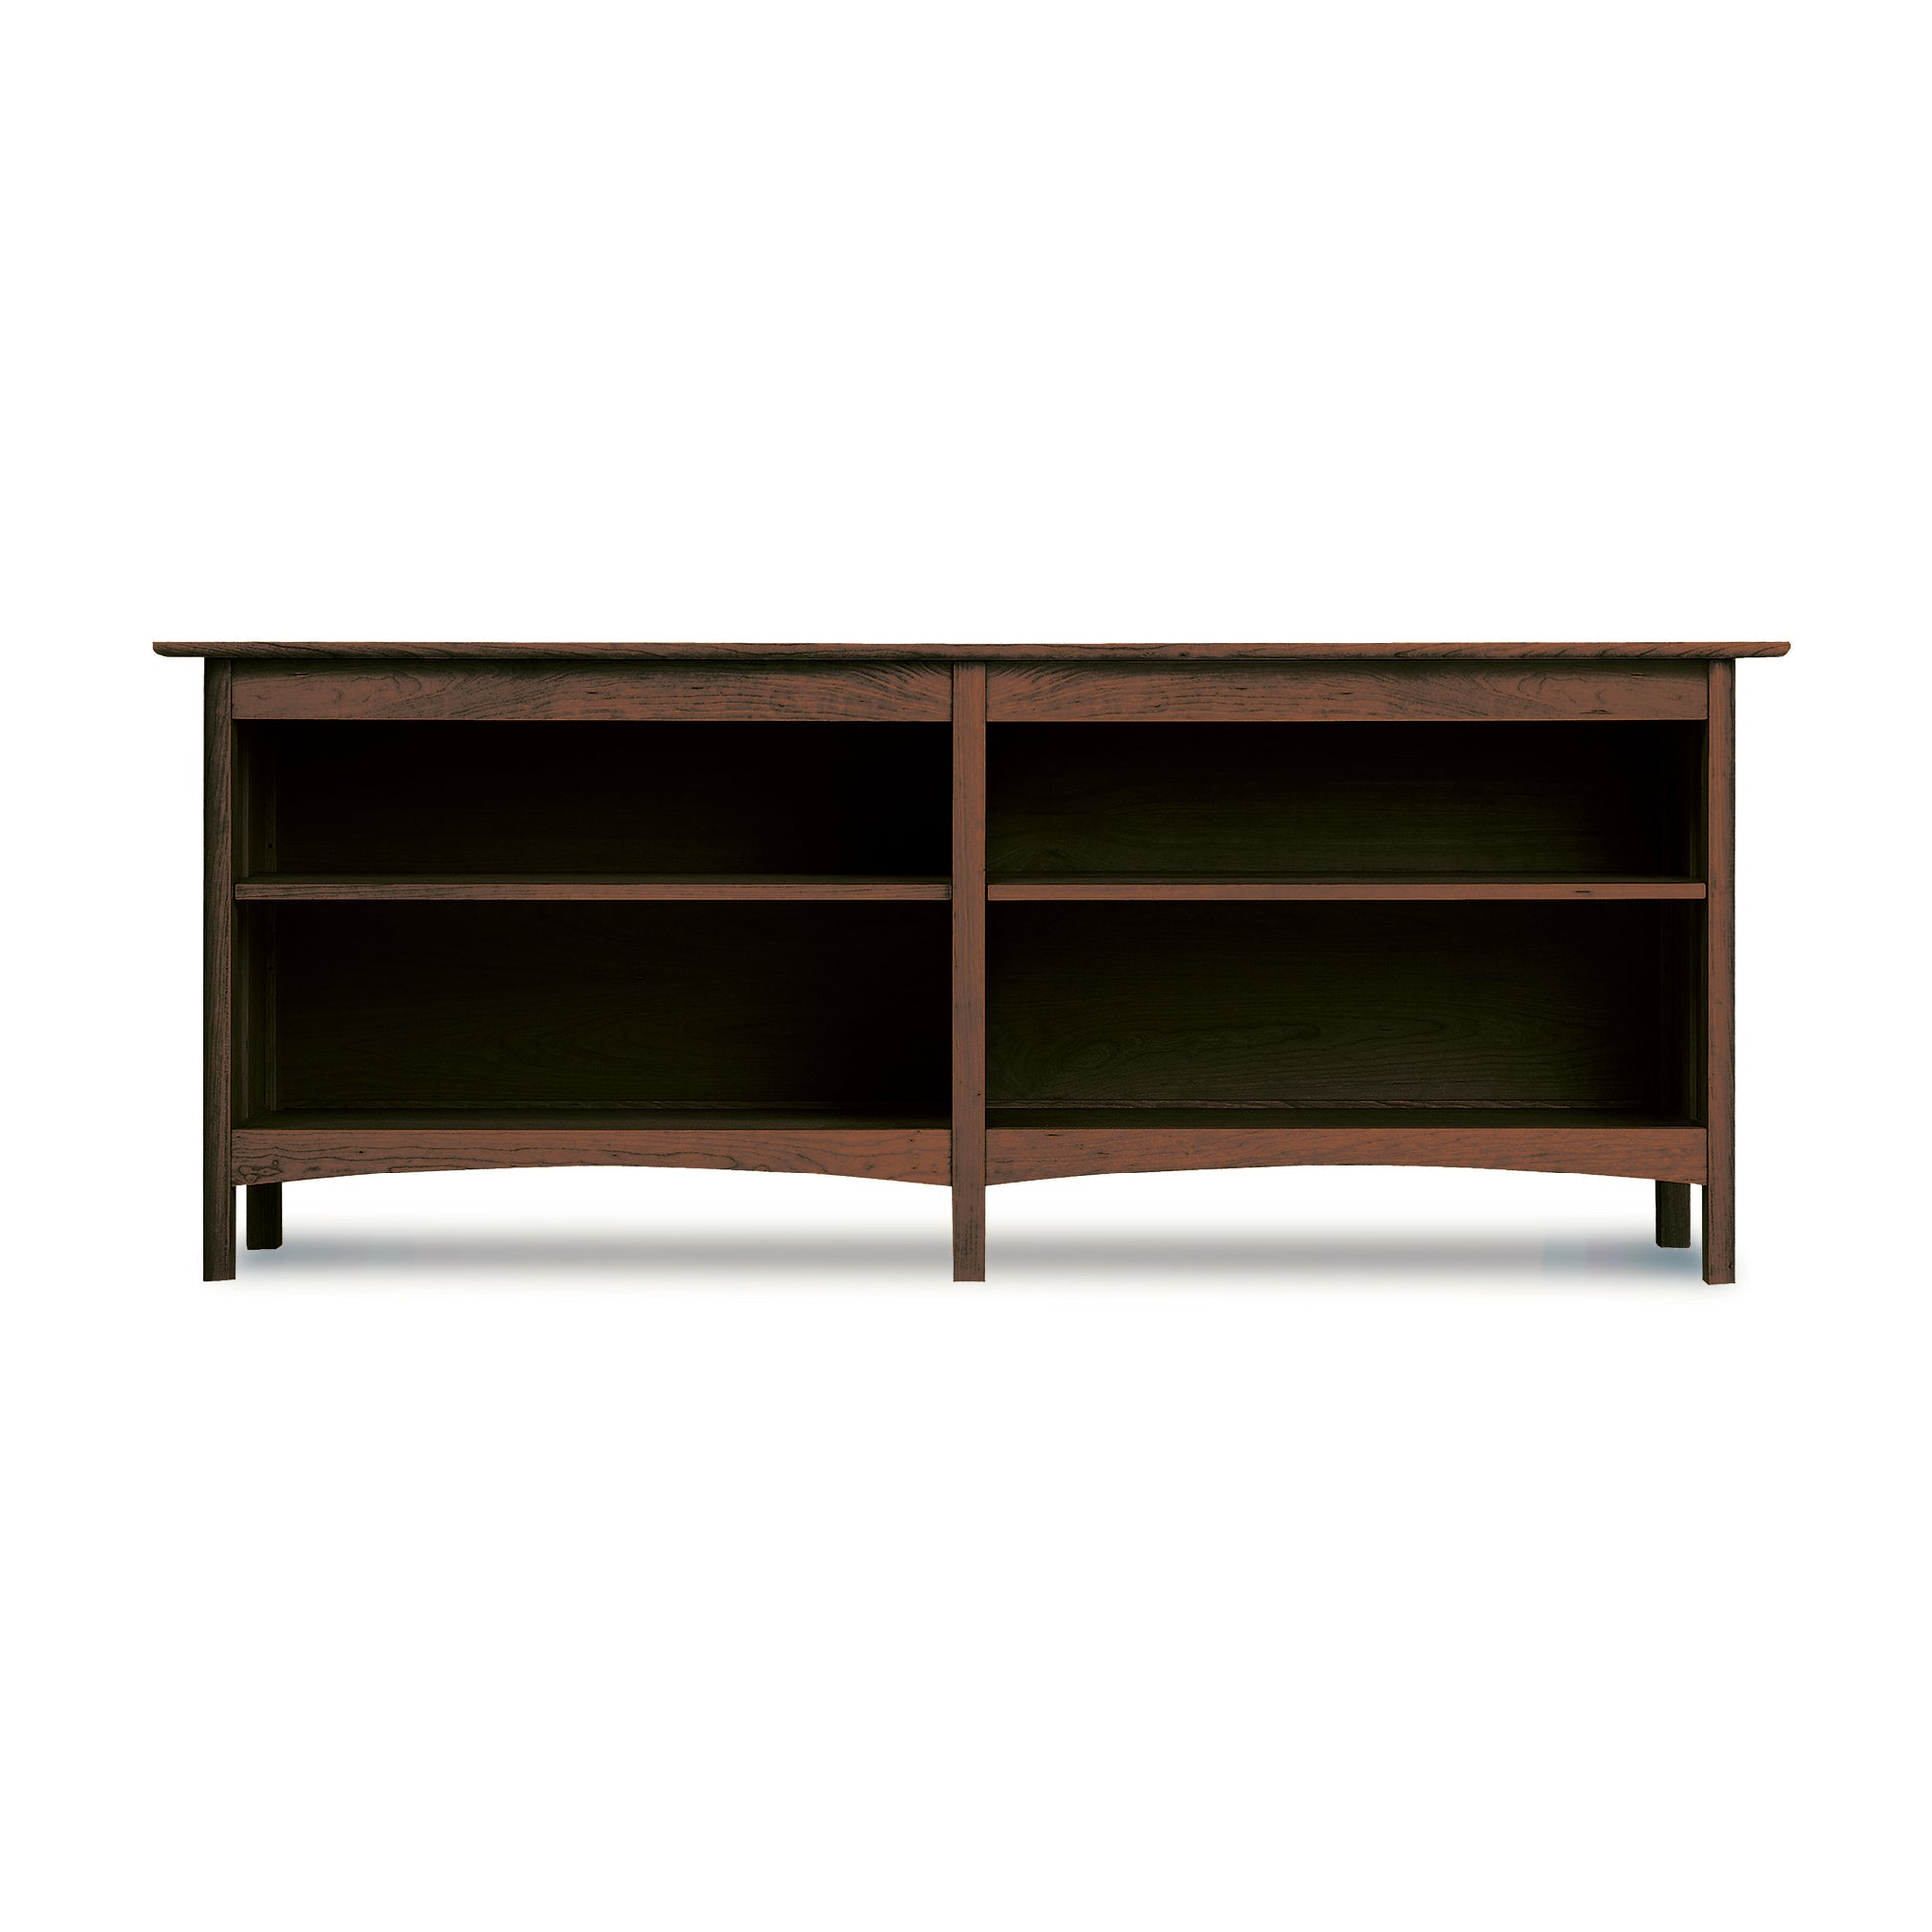 A Heartwood Shaker Open Console Bookcase with open shelves, handmade by Vermont Furniture Designs, isolated on a white background.